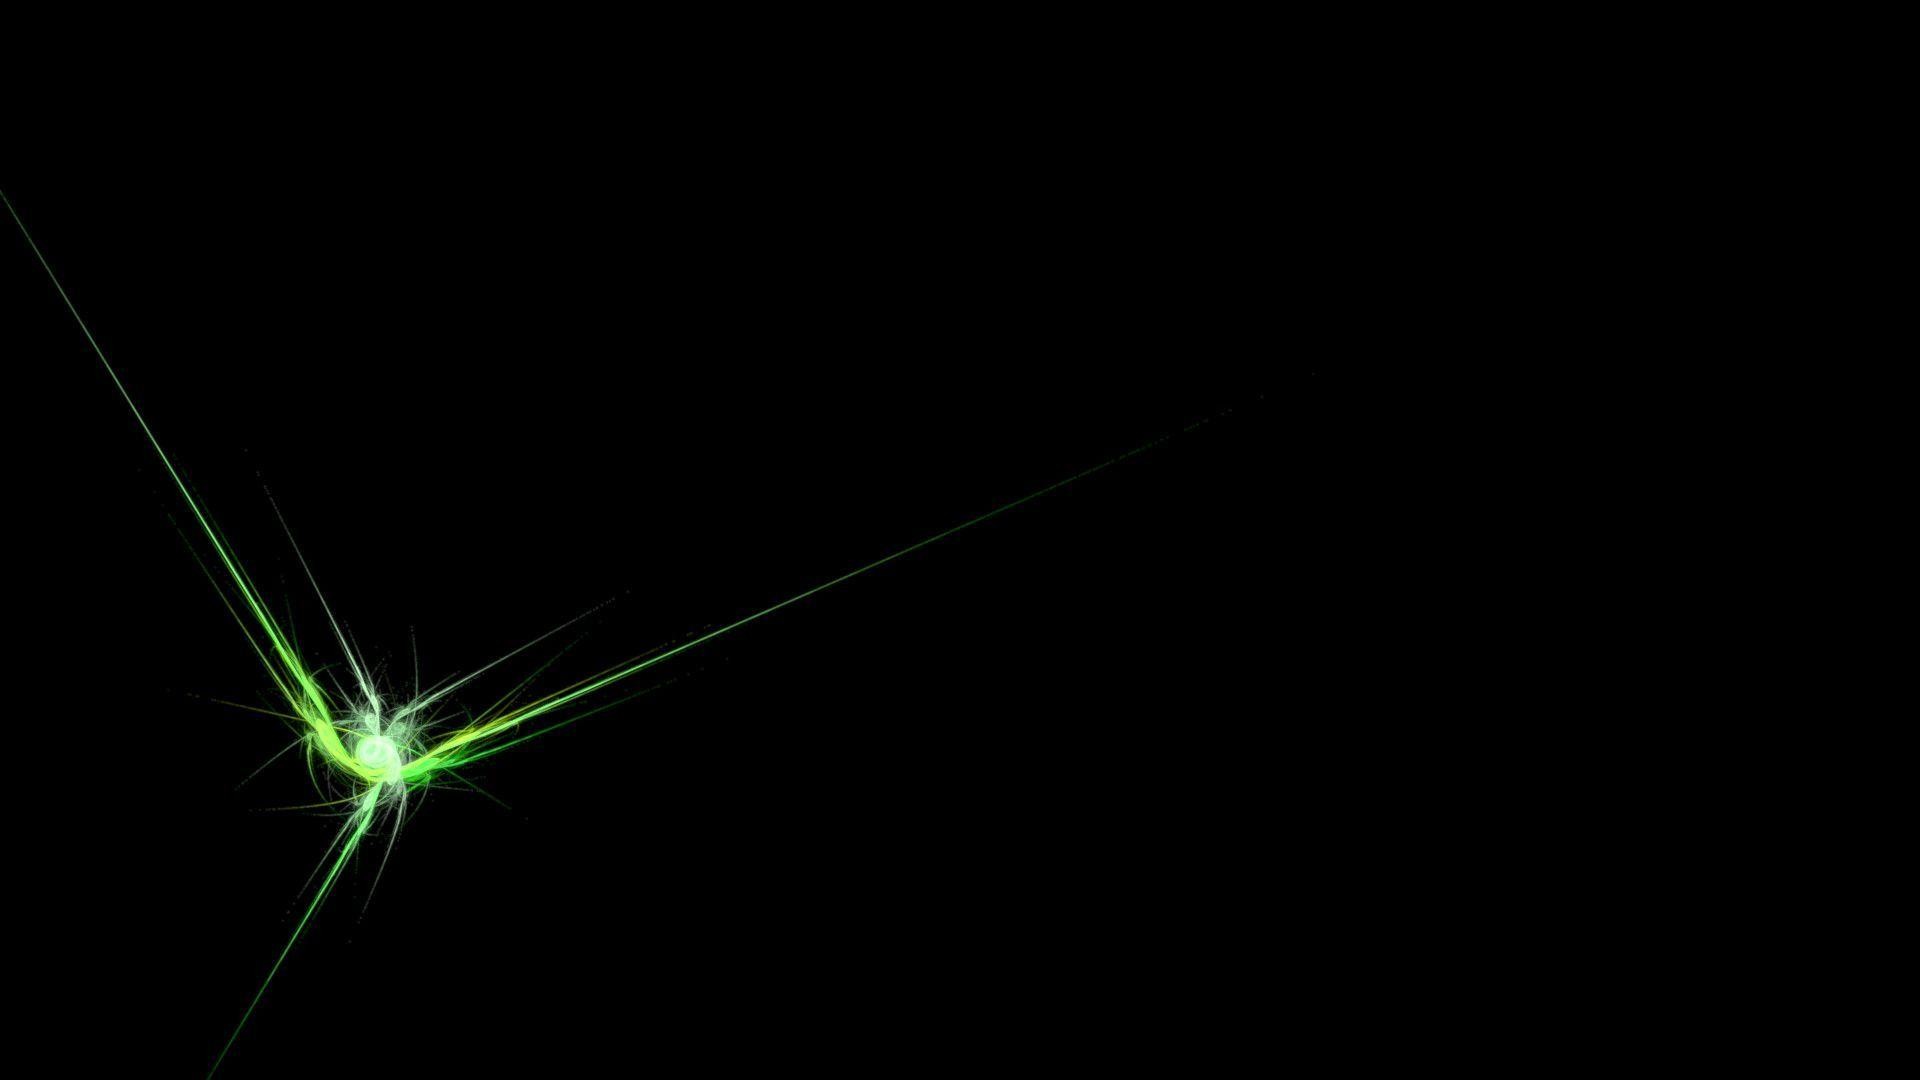 1920x1080 Wallpapers For > Black And Neon Green Backgrounds